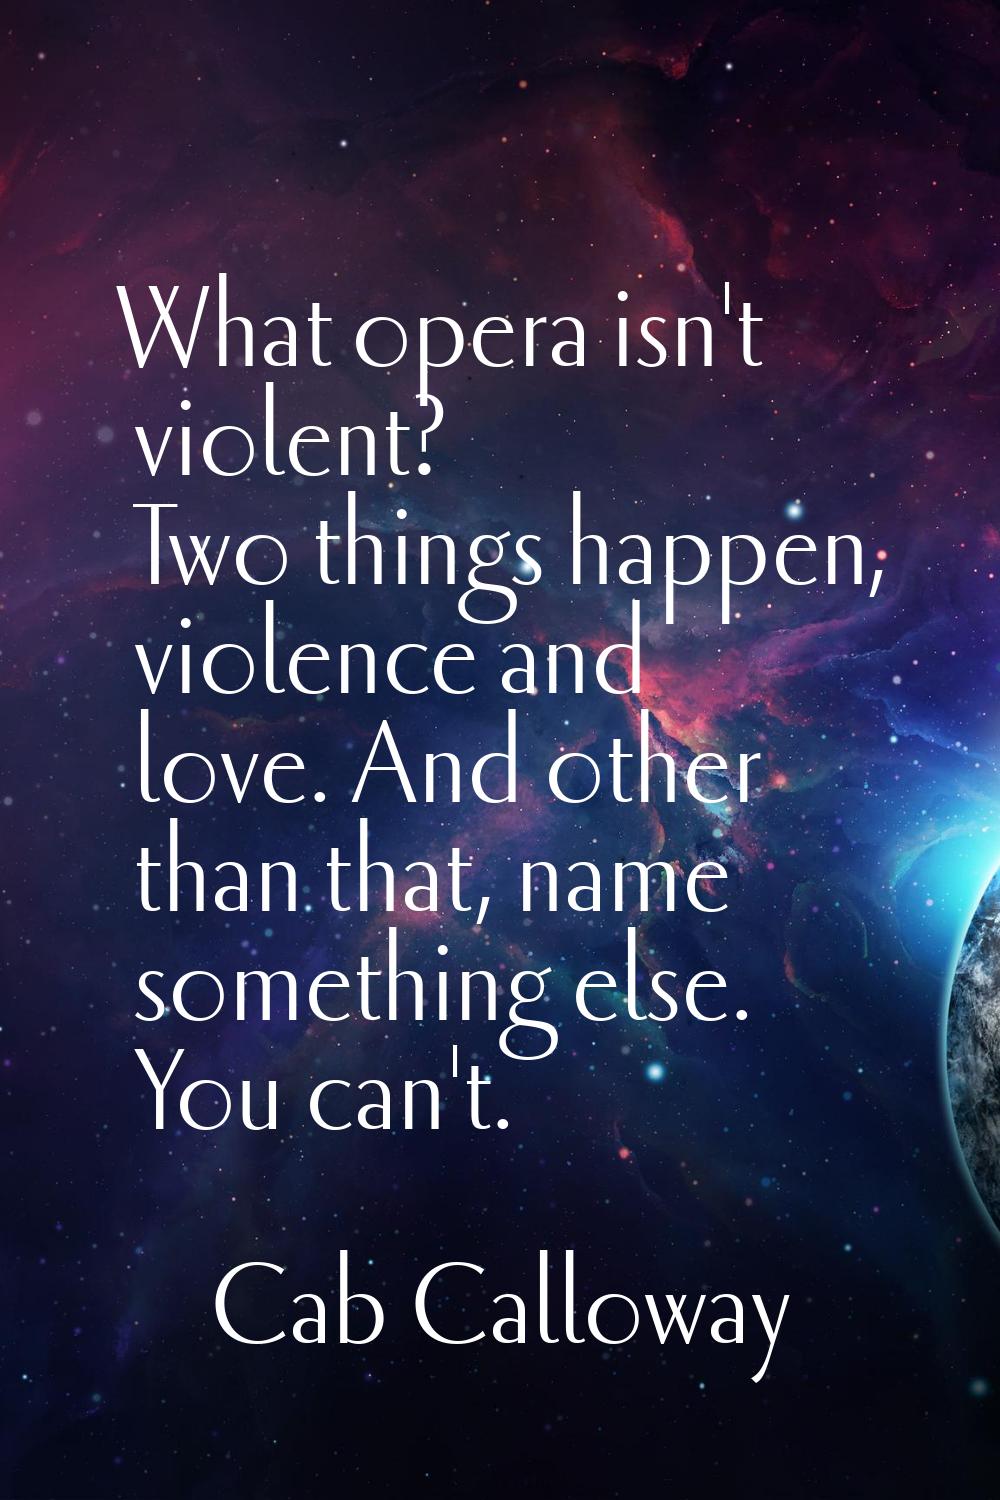 What opera isn't violent? Two things happen, violence and love. And other than that, name something